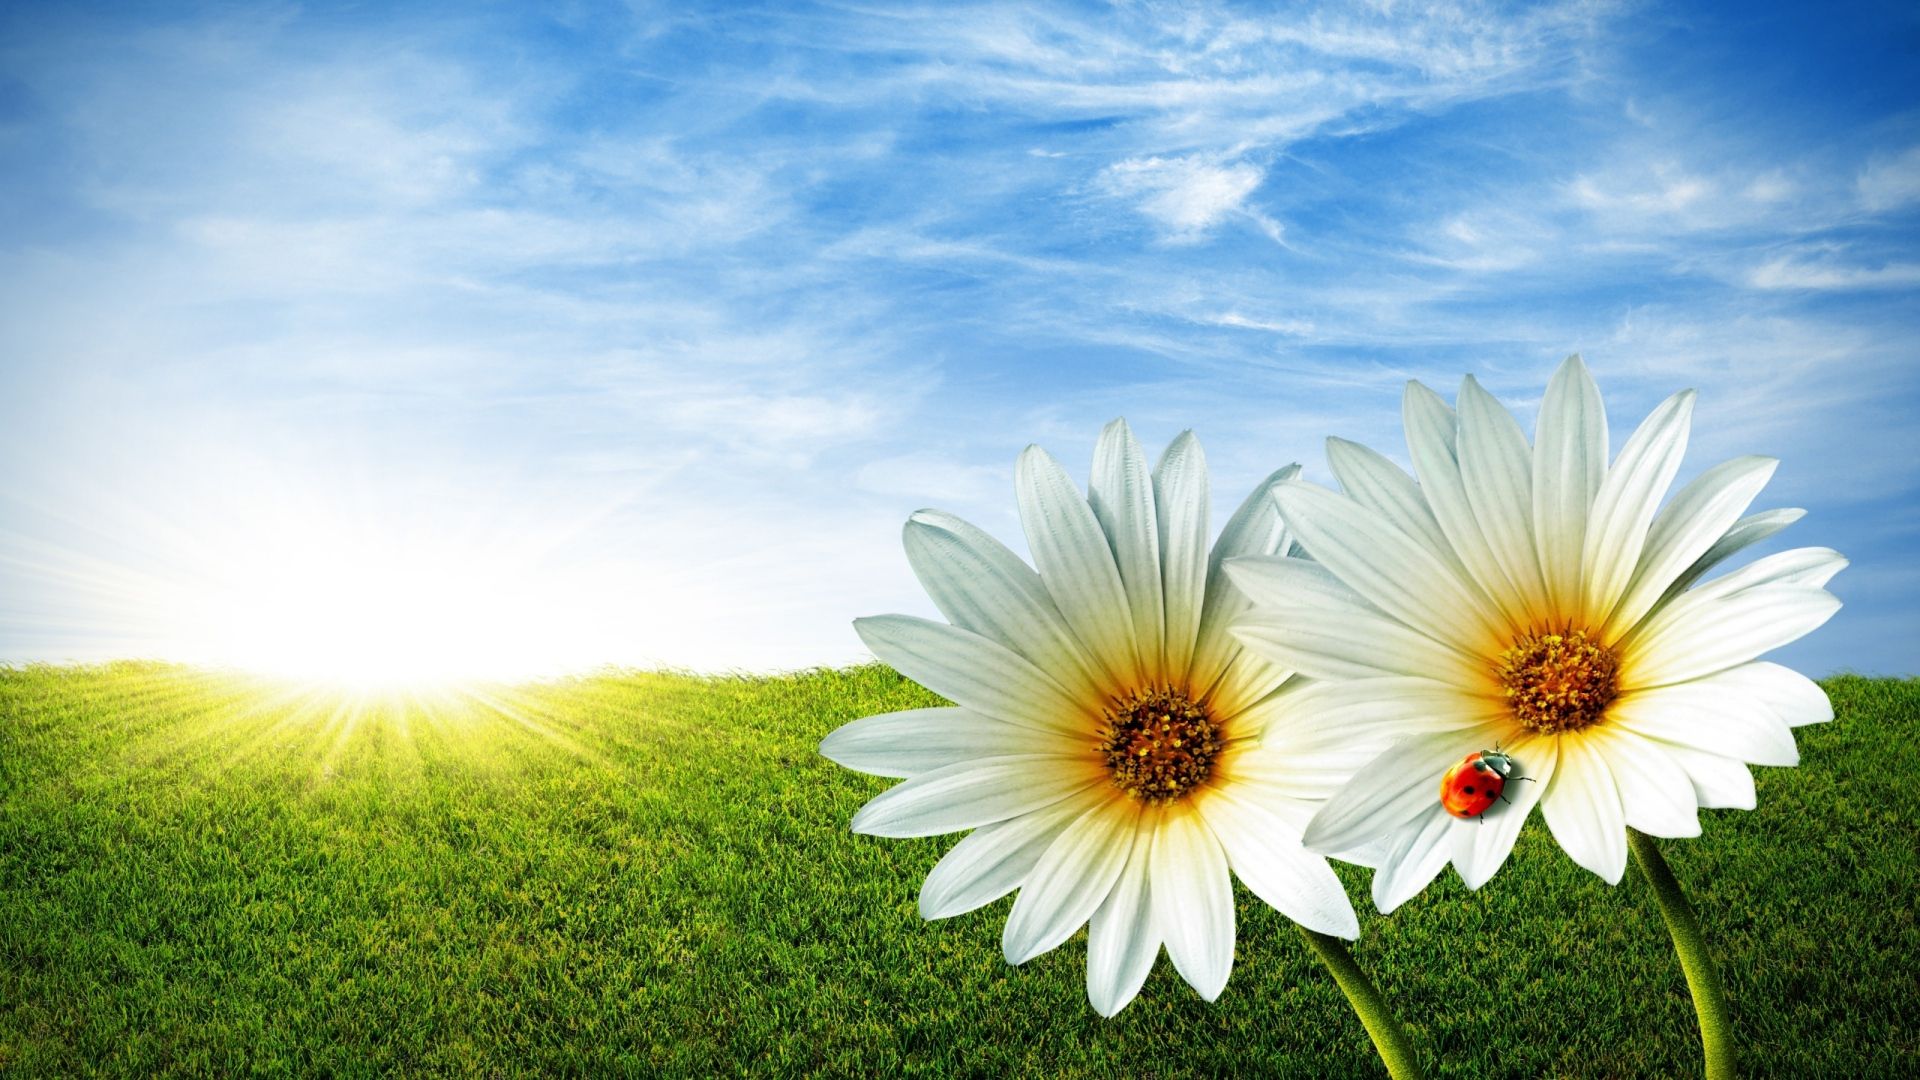 Download Wallpaper 1920x1080 daisies, flowers, field, nature